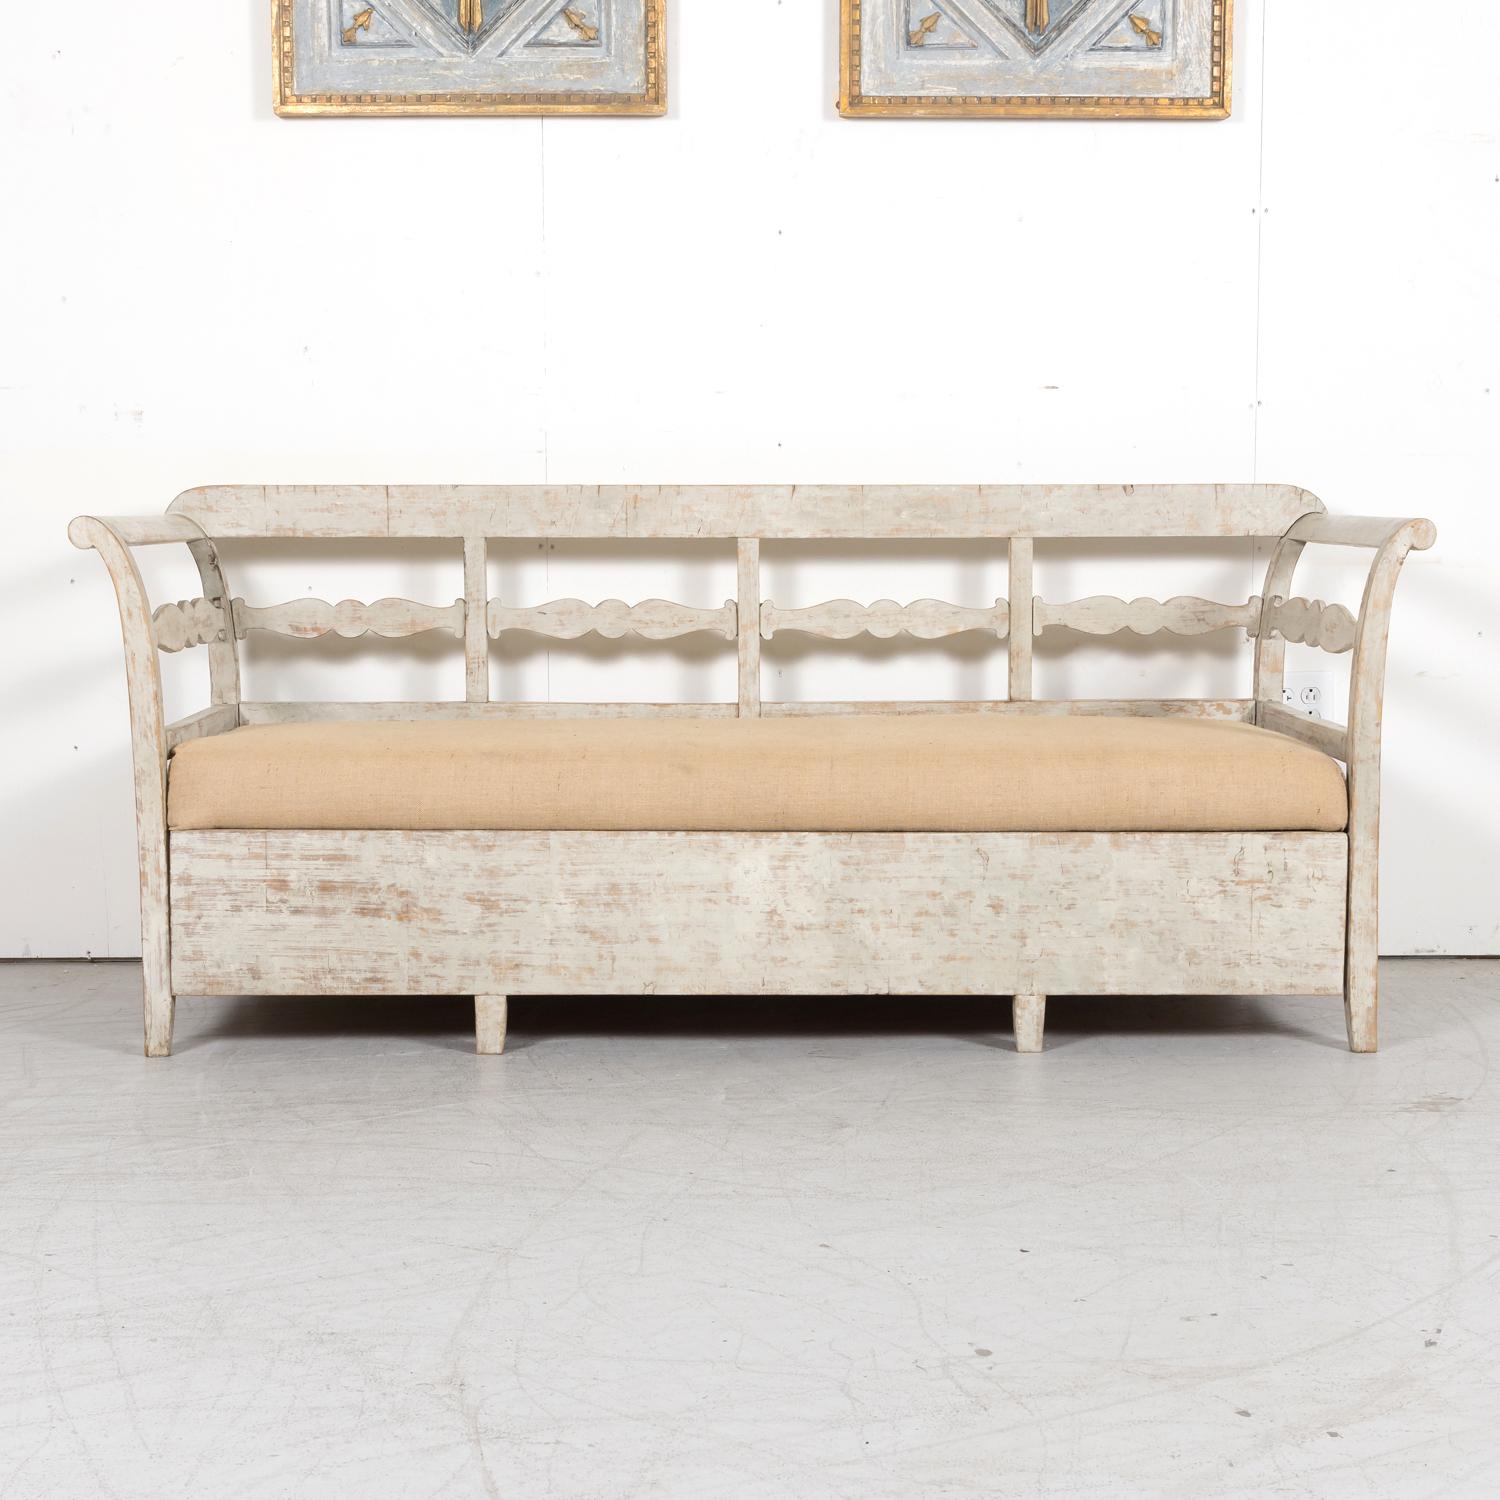 Gustavian 19th Century Painted Swedish Bench with Trundle Bed